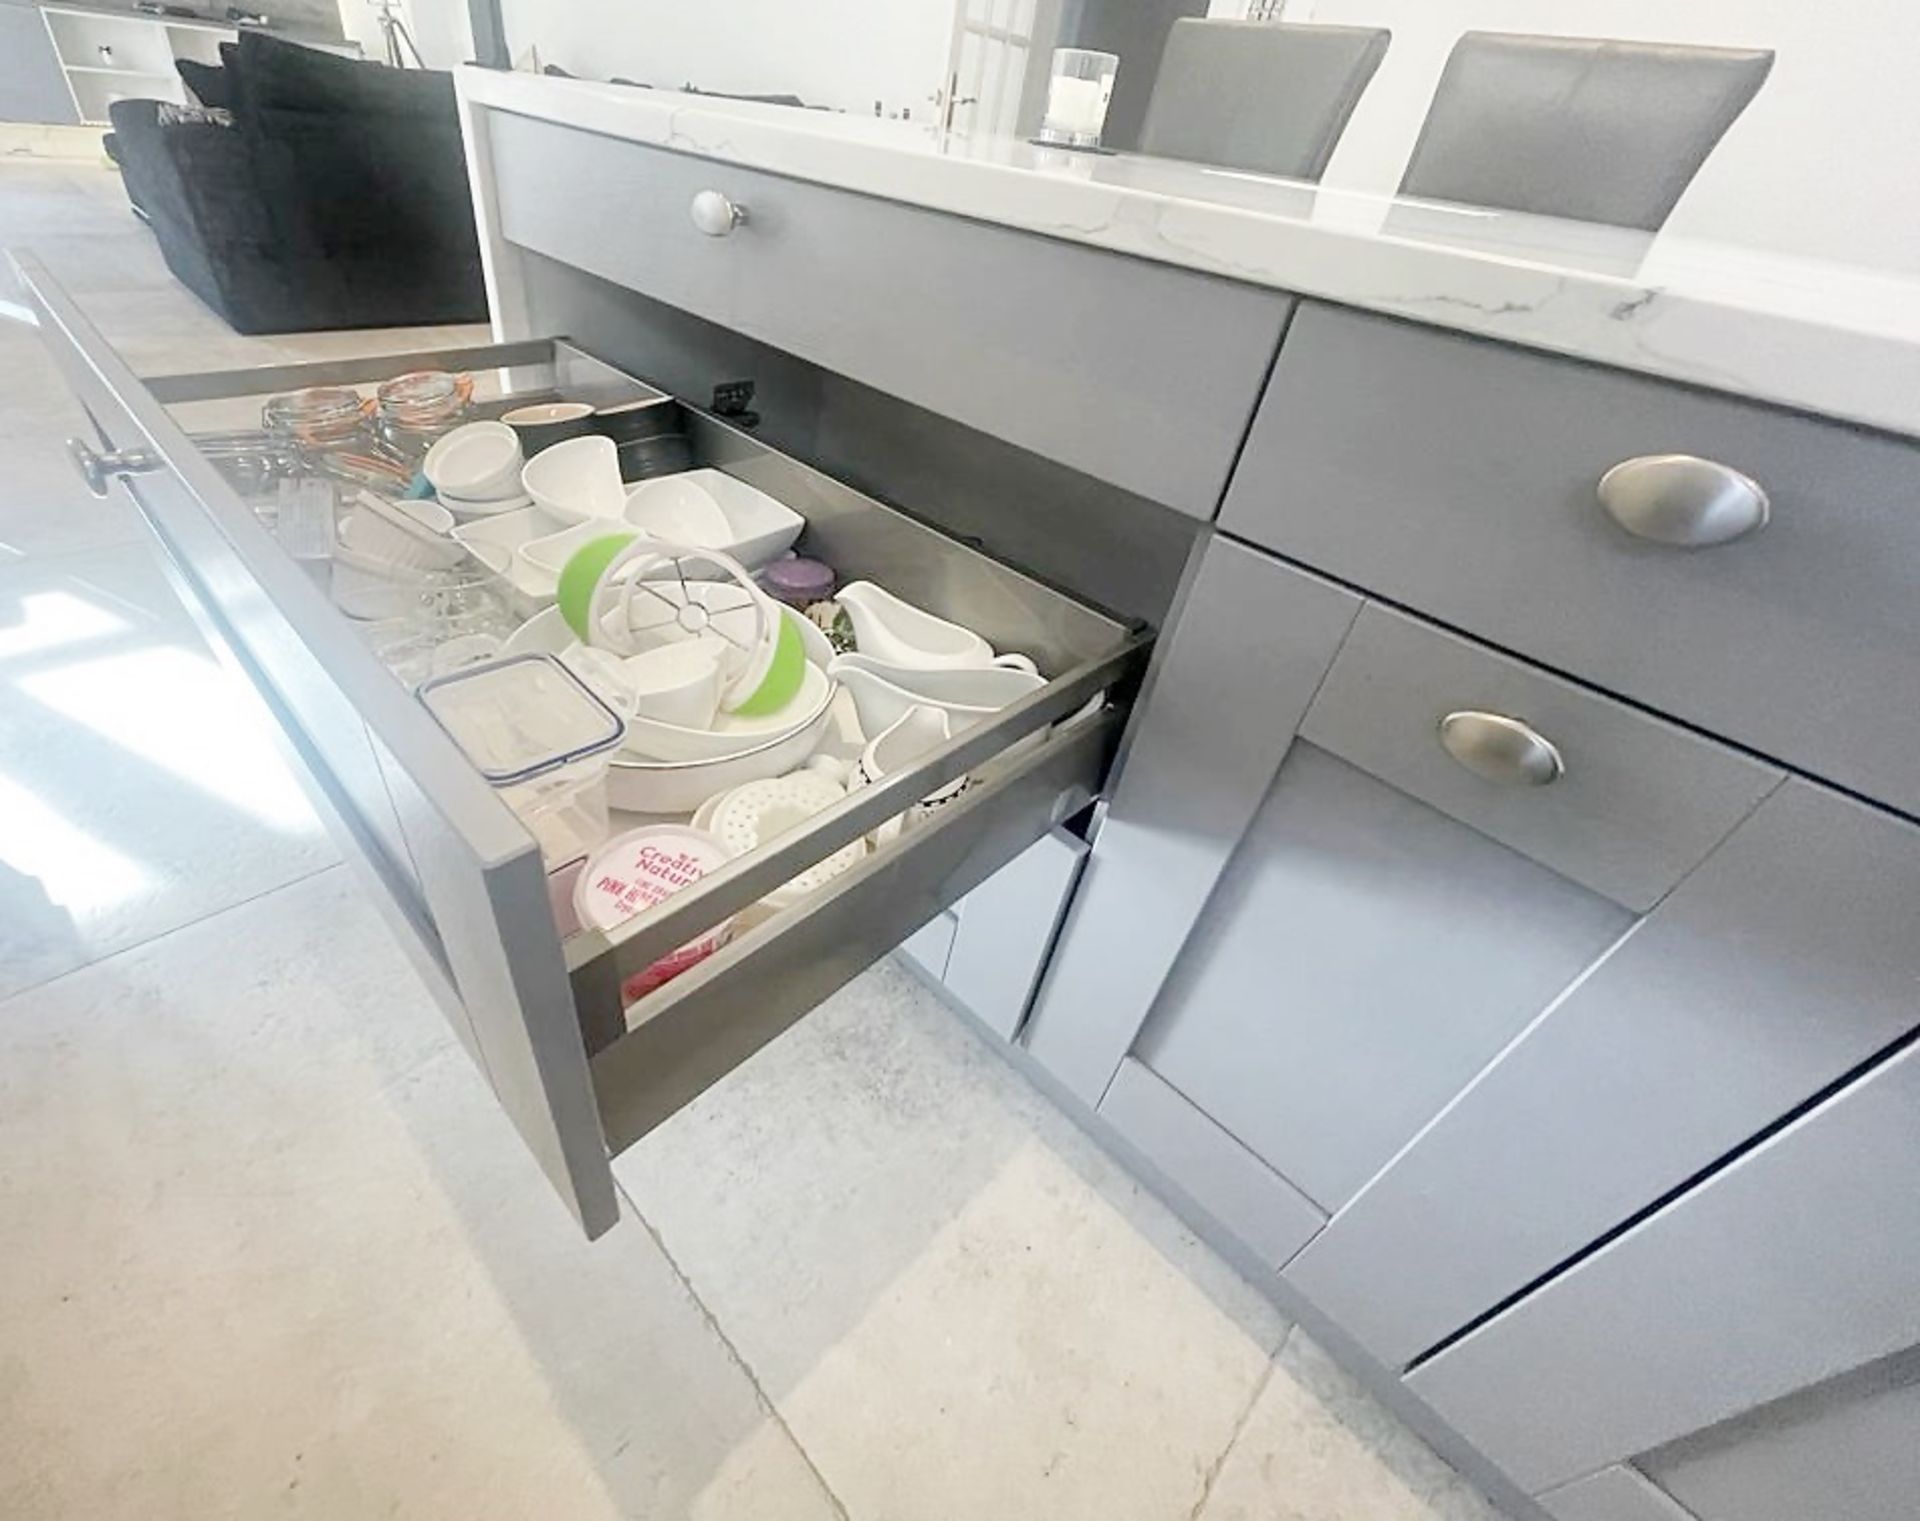 1 x SIEMATIC Bespoke Shaker-style Fitted Kitchen, Utility Room, Appliances & Modern Quartz Surfaces - Image 25 of 153